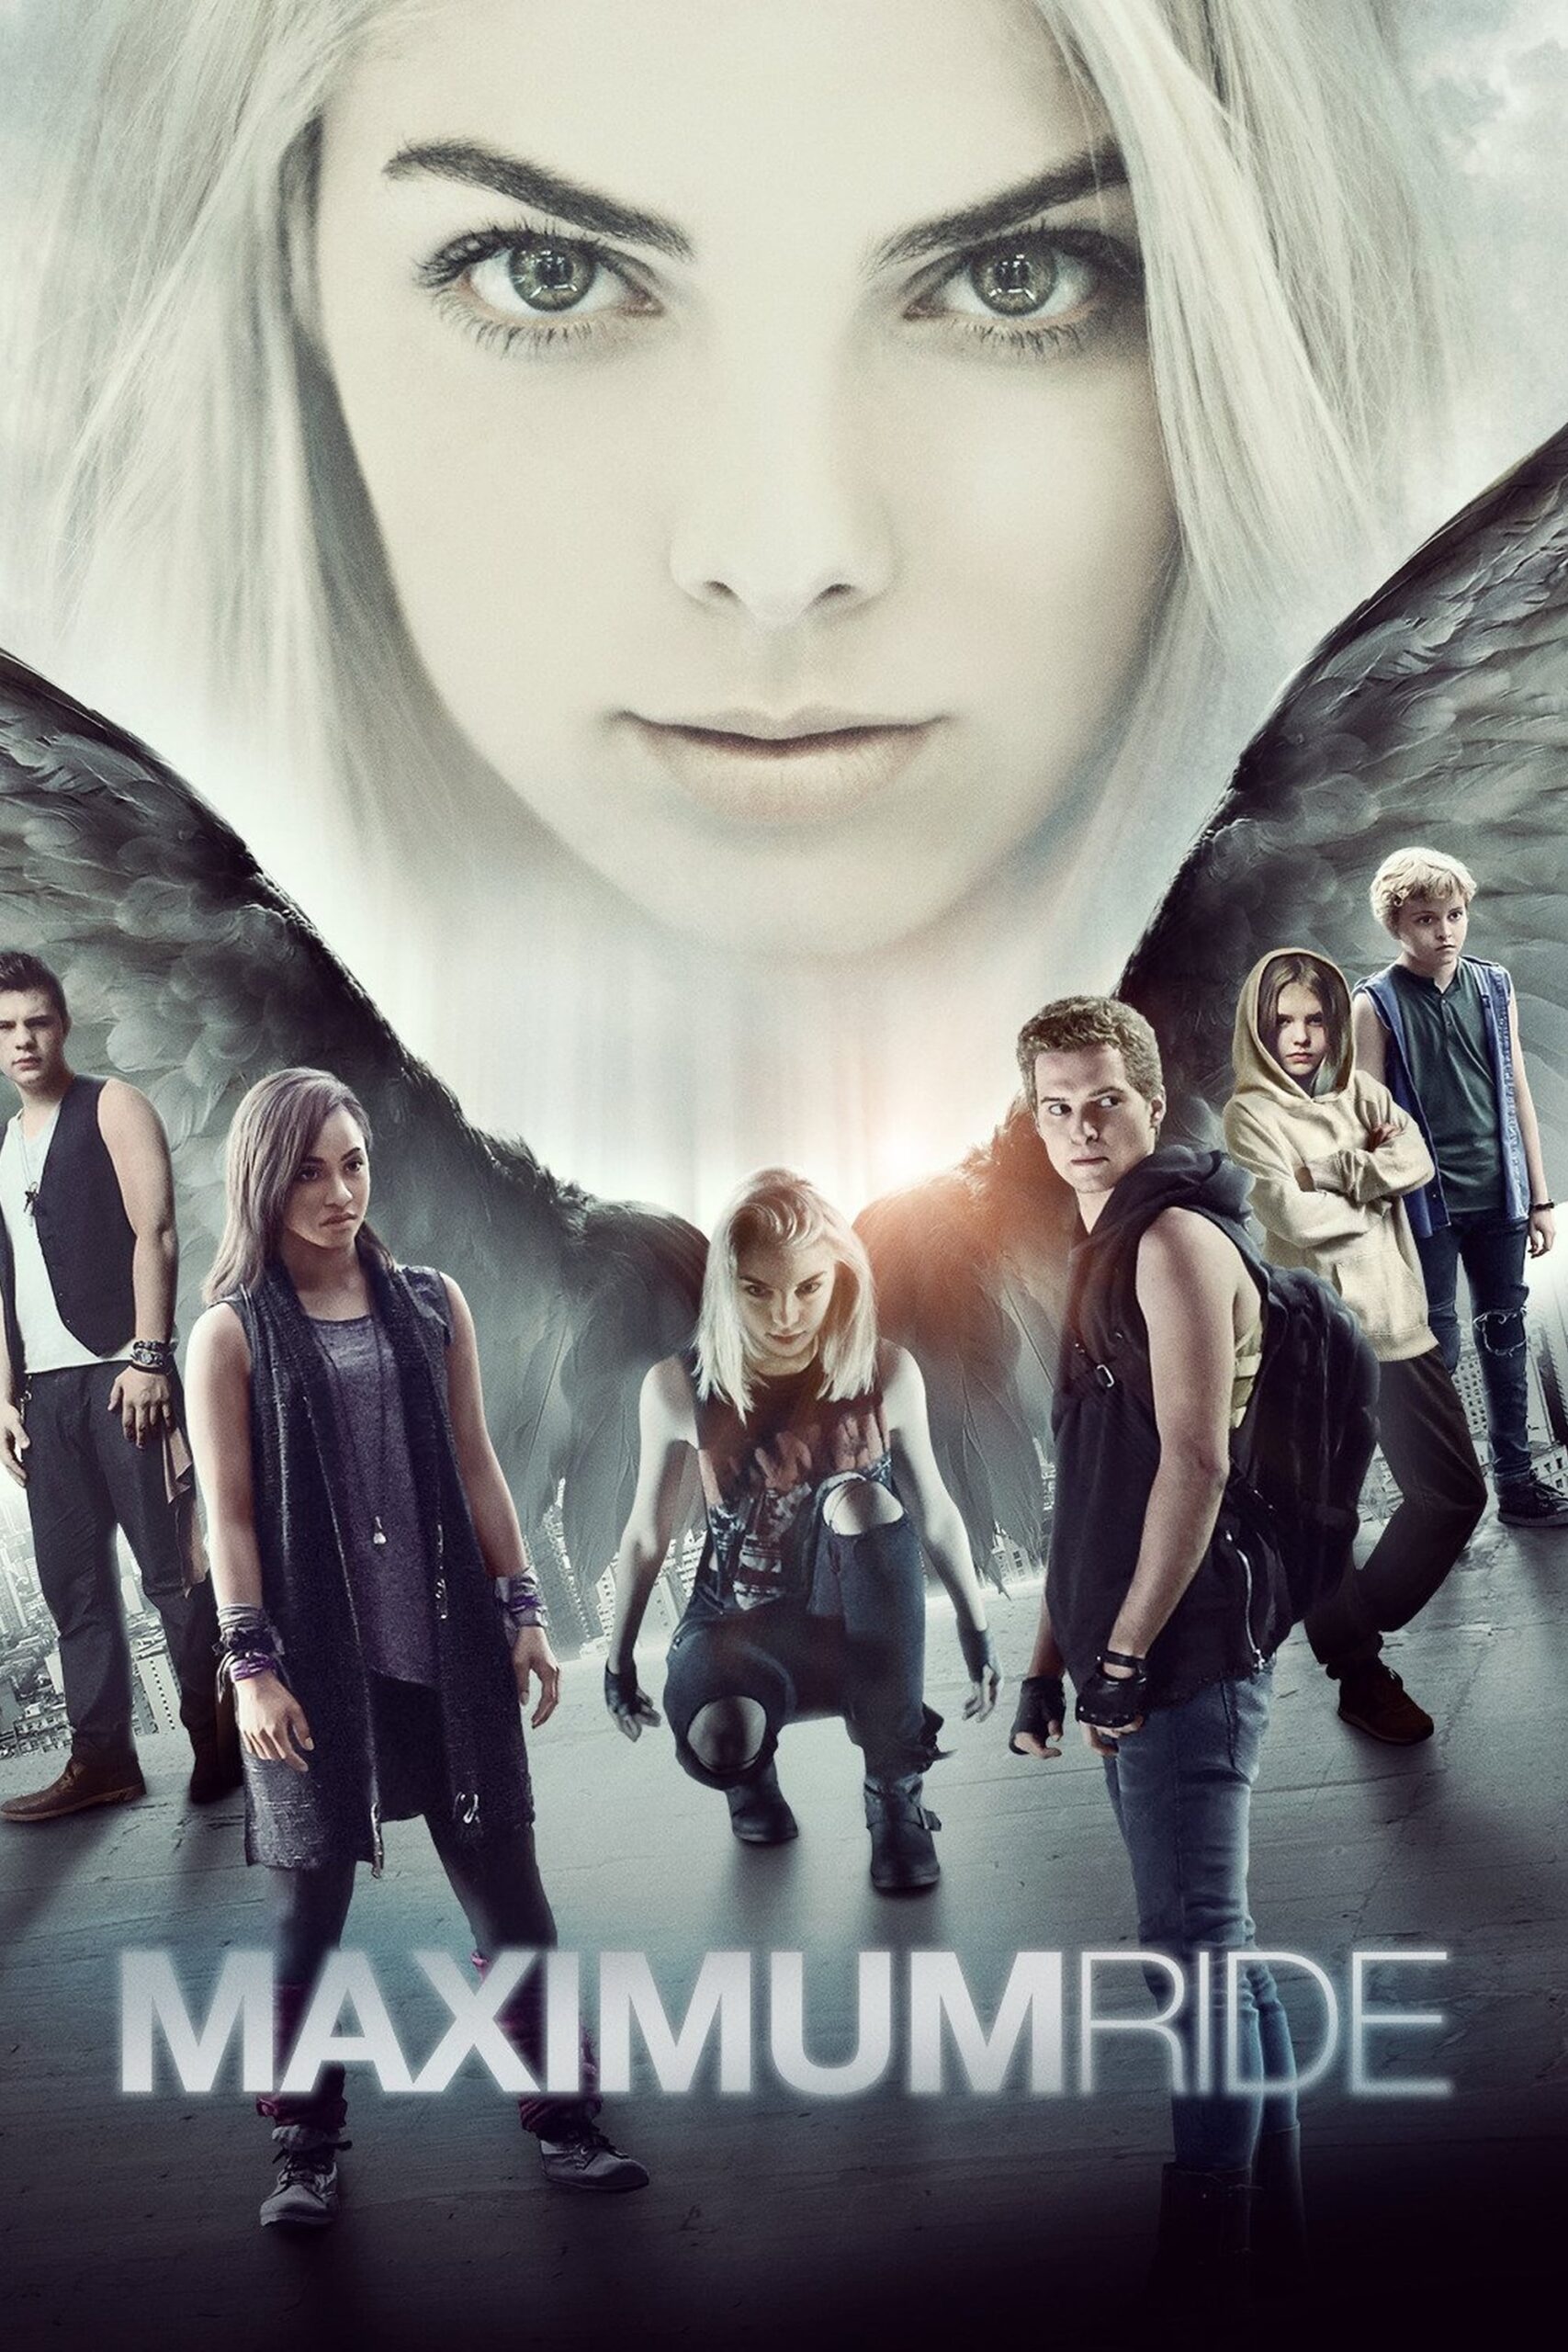 Poster for the movie "Maximum Ride"